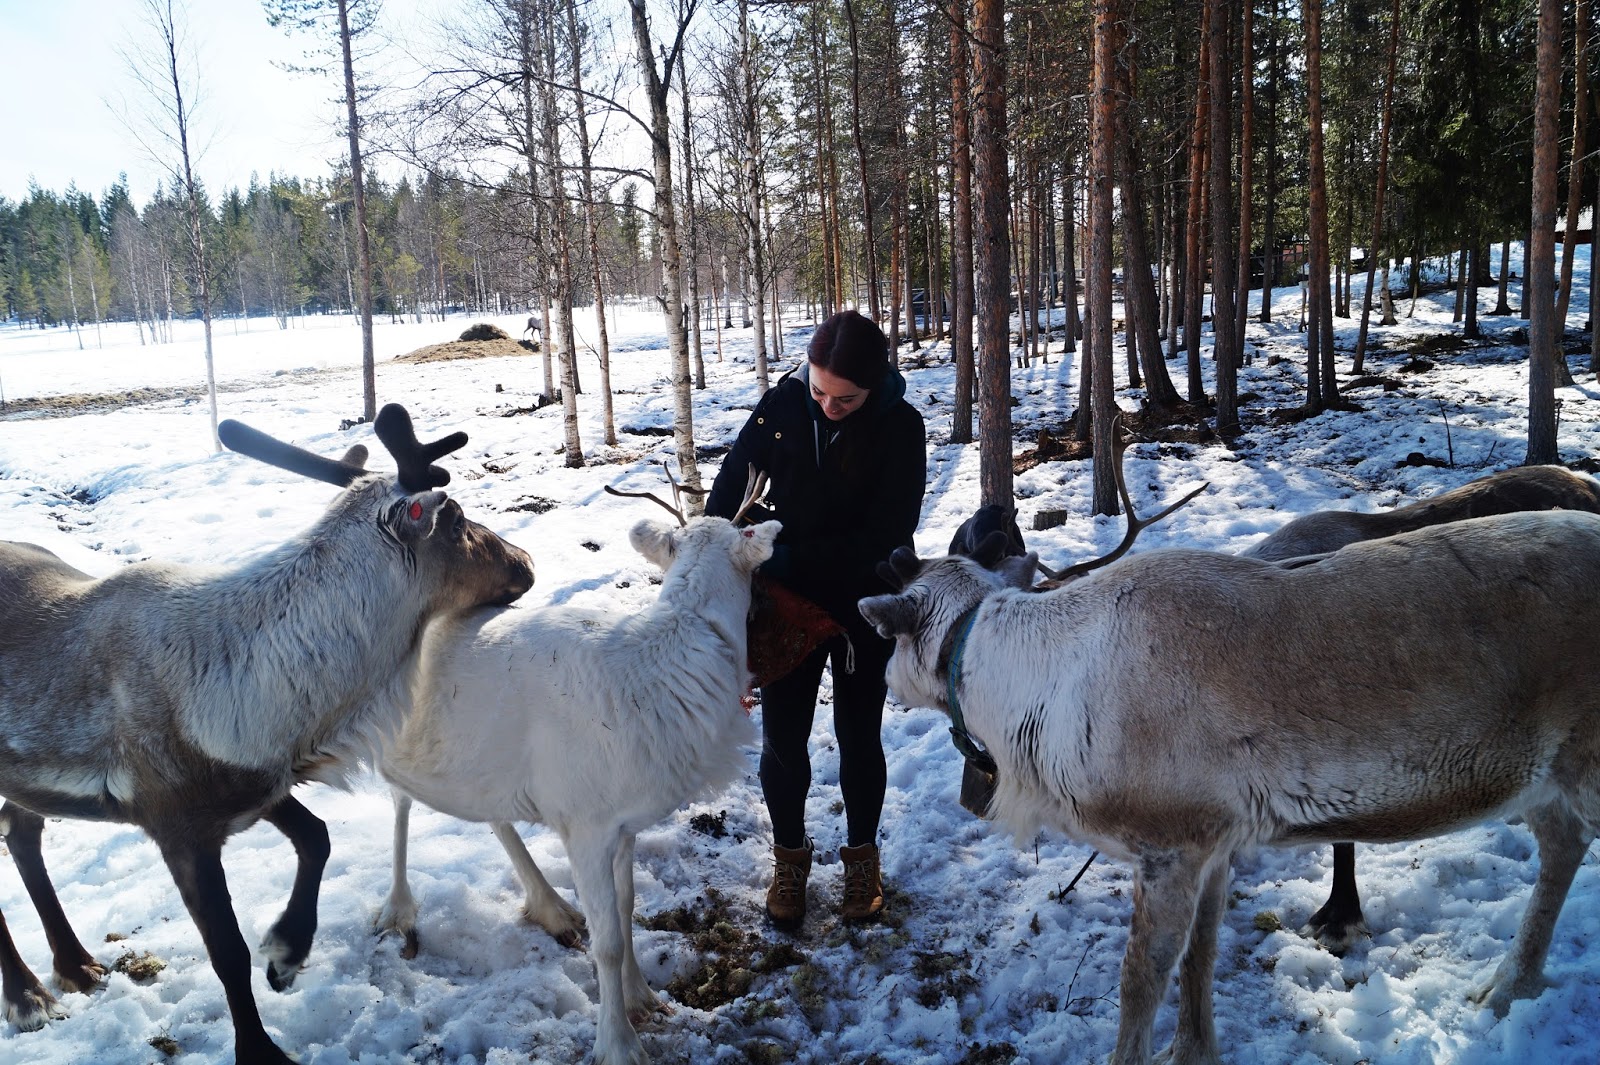 Feeding reindeer with an Amish family in northern Sweden, May 2015